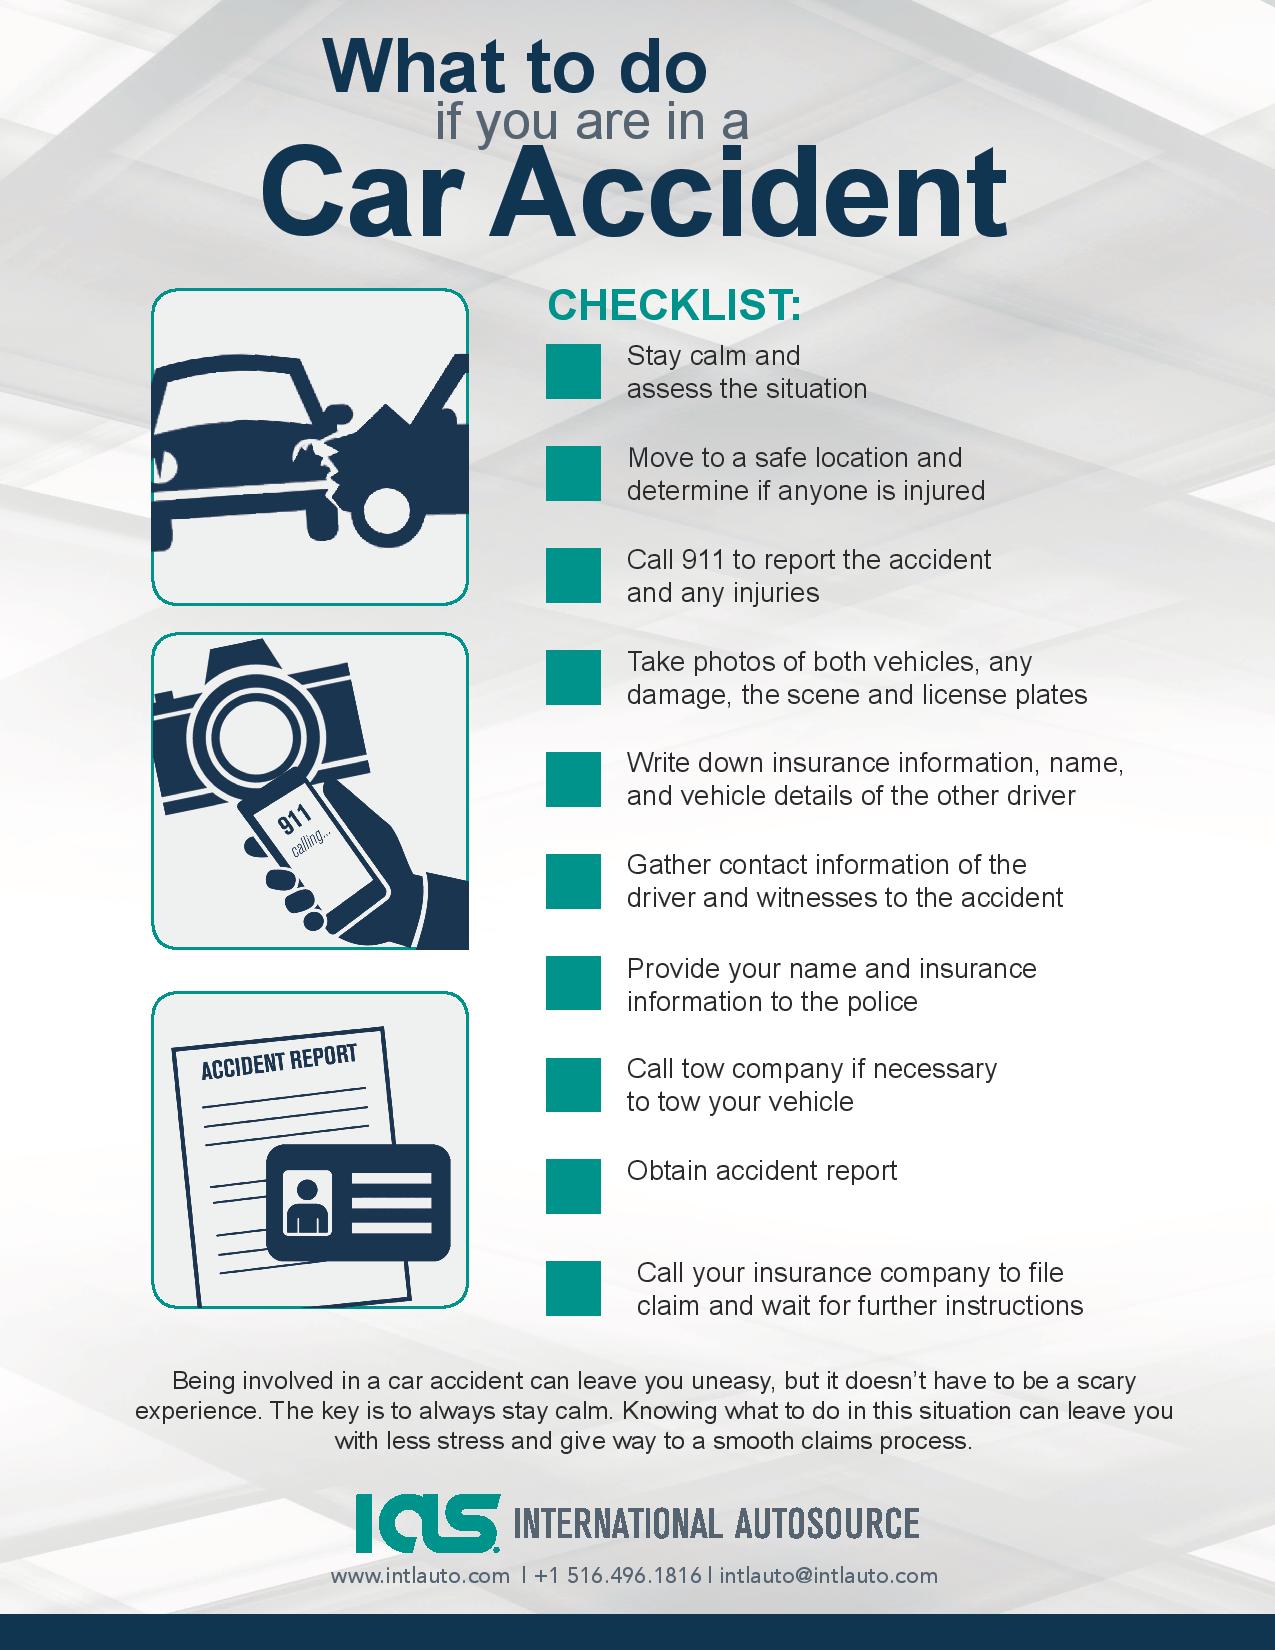 What To Do If You Are In A Car Accident Checklist International